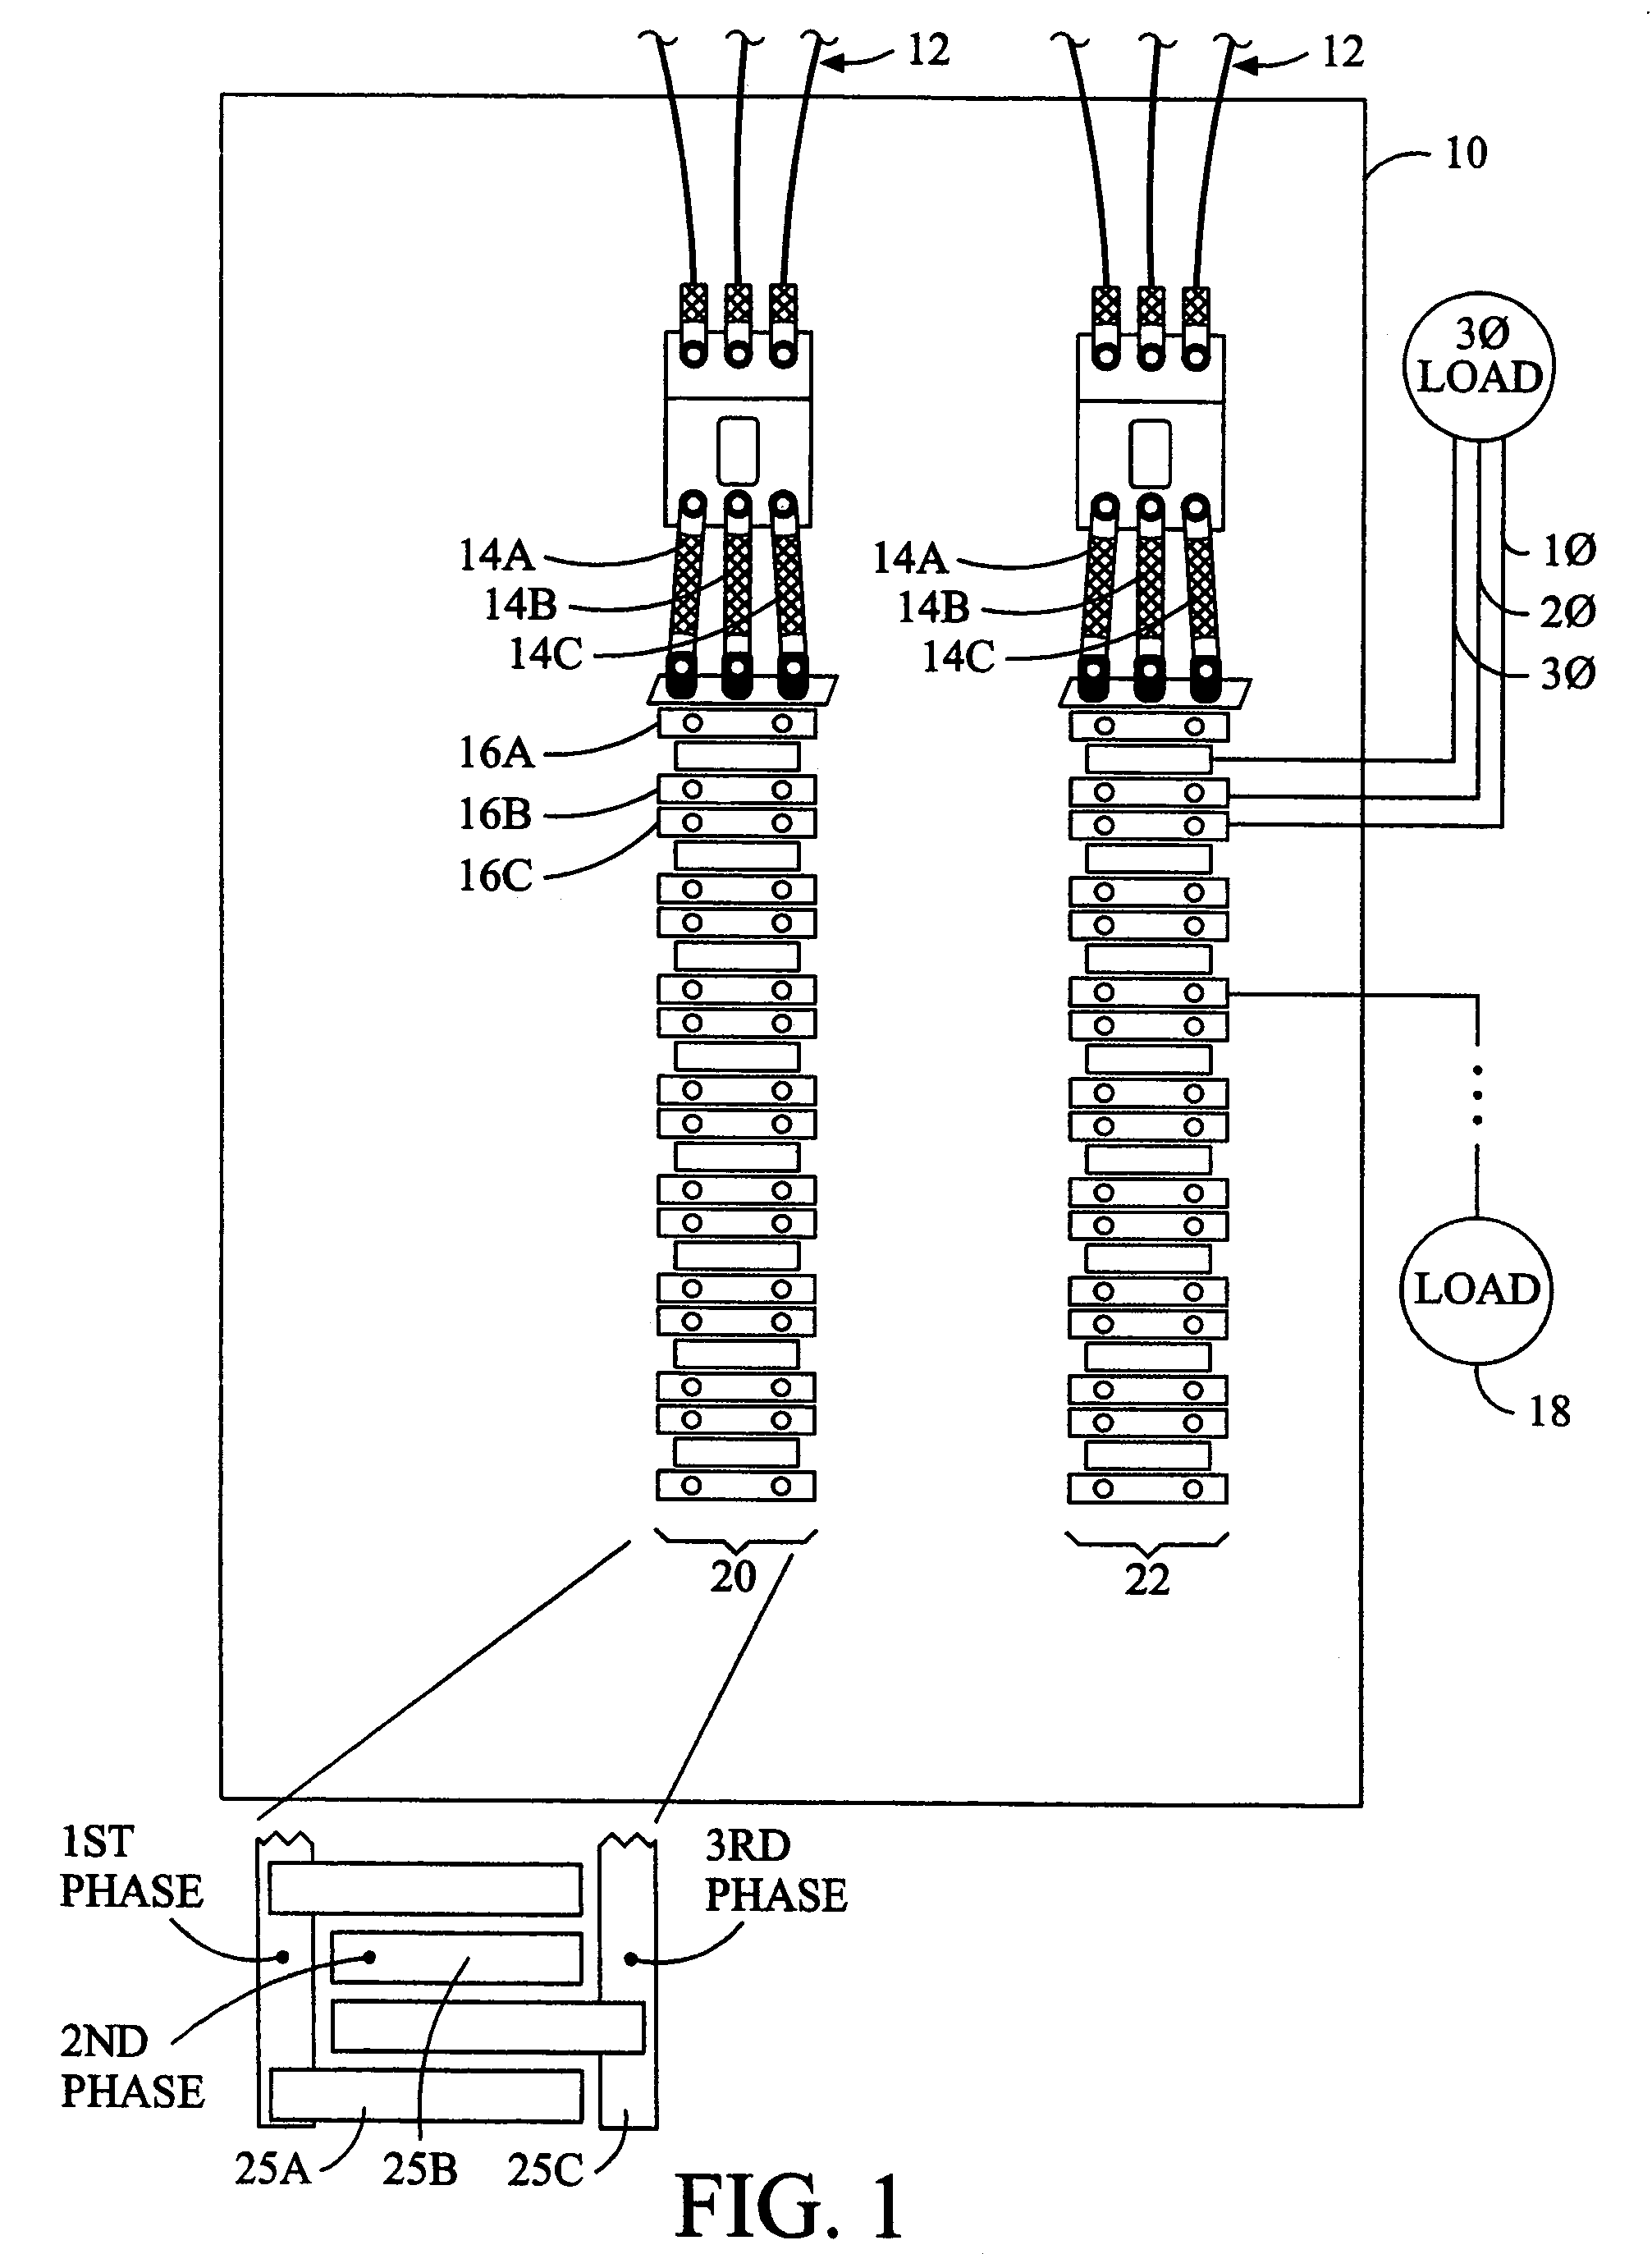 Power monitoring system that determines phase using a superimposed signal